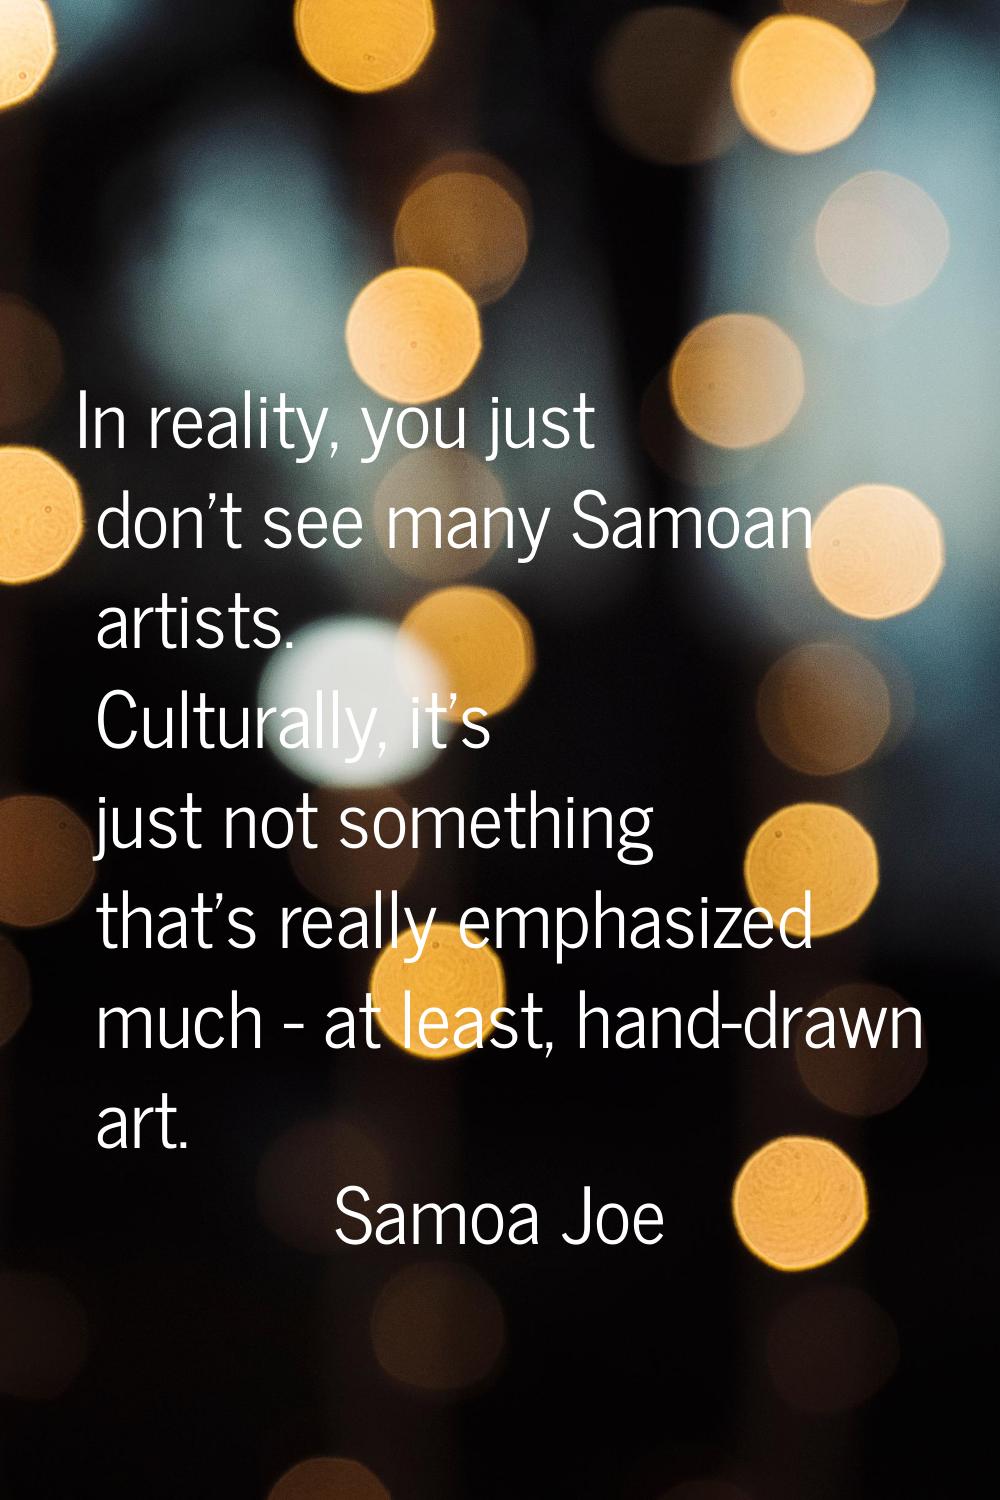 In reality, you just don't see many Samoan artists. Culturally, it's just not something that's real